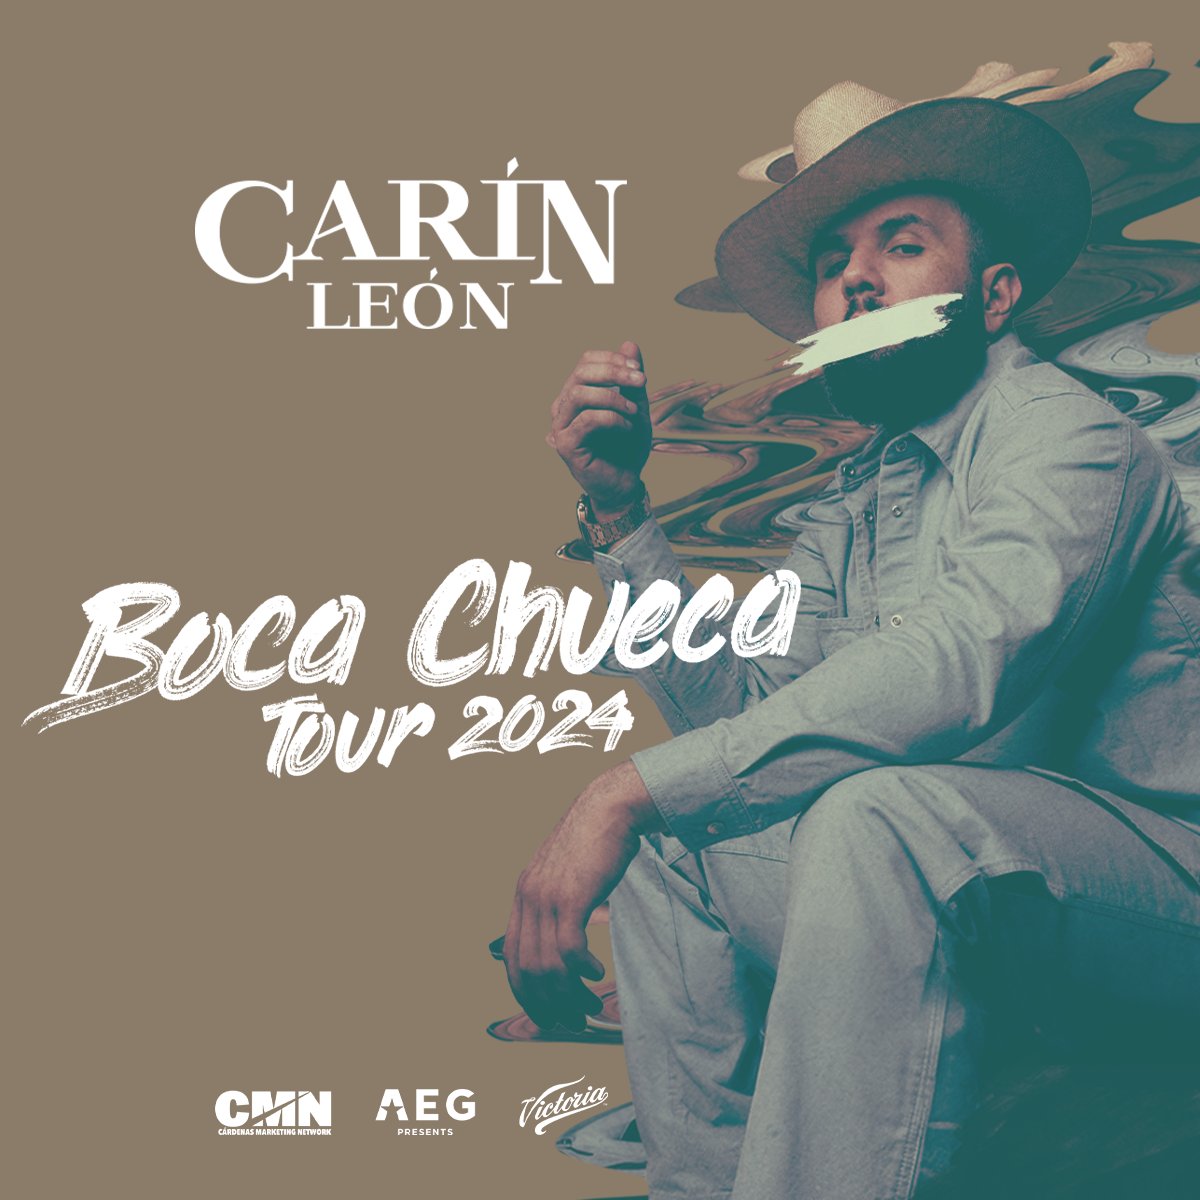 ¡Por La Familia! 🦁 @carinleonofi - Boca Chueca Tour 2024 is on sale now. Don't miss your chance to see him live and unlock exclusive perks as a VIP. 🎟️ Get your tickets here: ticketmaster.com/carin-leon-tic…